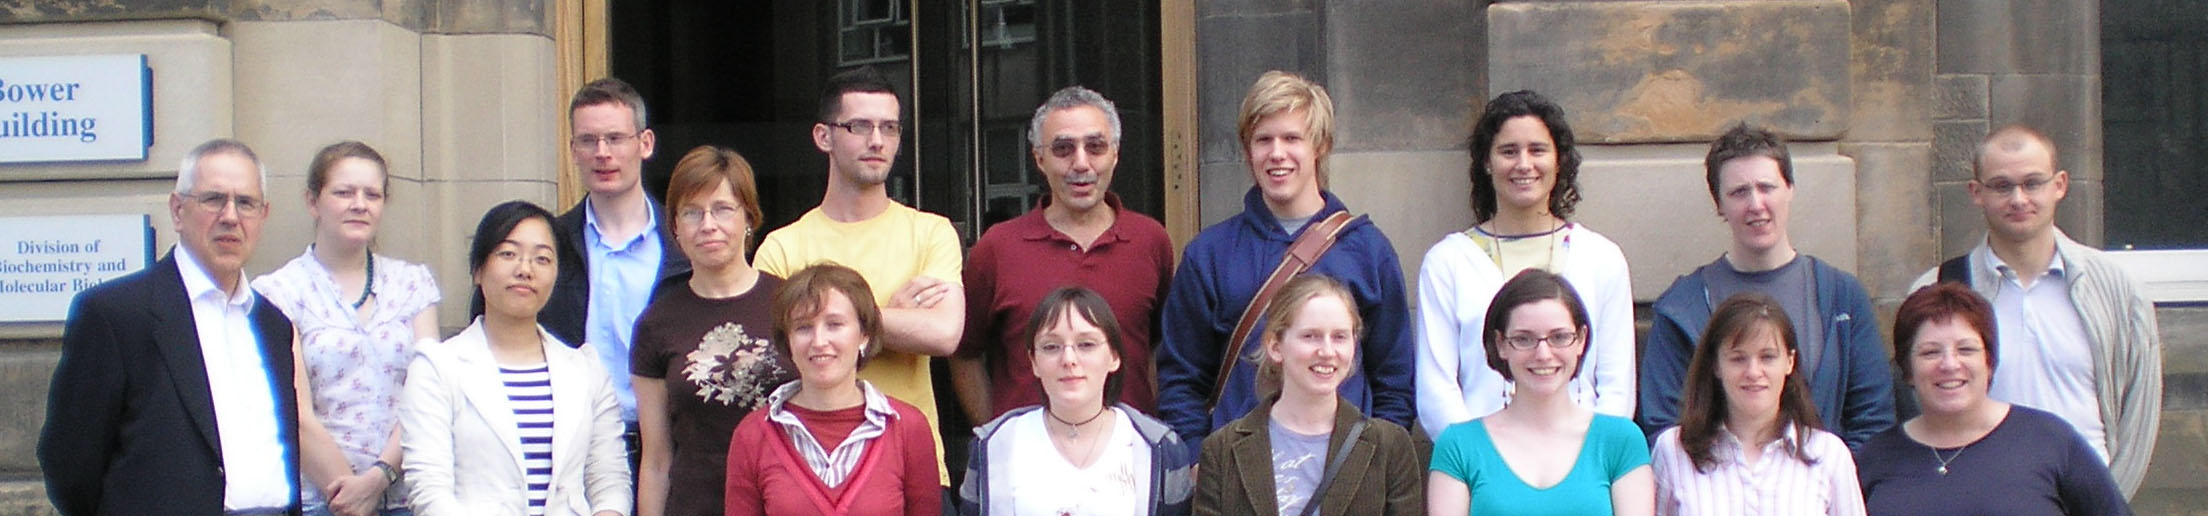 Glasgow group picture.jpg